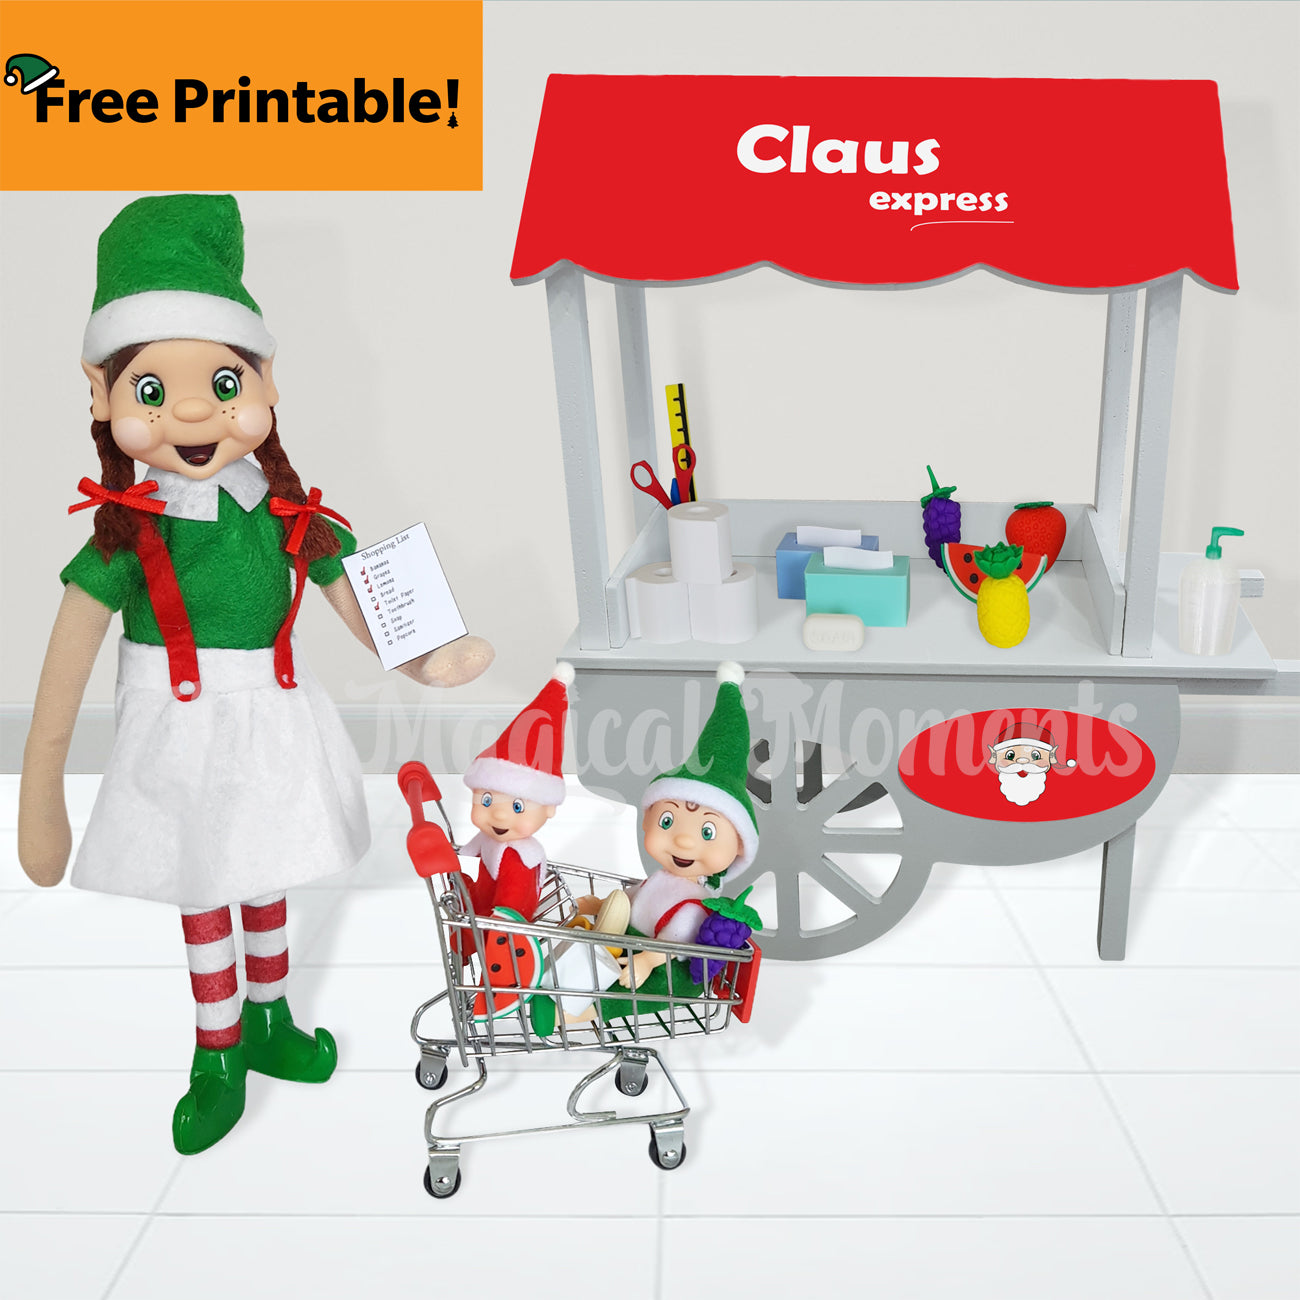 Elf Shopping at a mini mart, claus express. With miniature elf shopping props. She has a shopping list and elf toddler, Baby toddler in her shopping cart